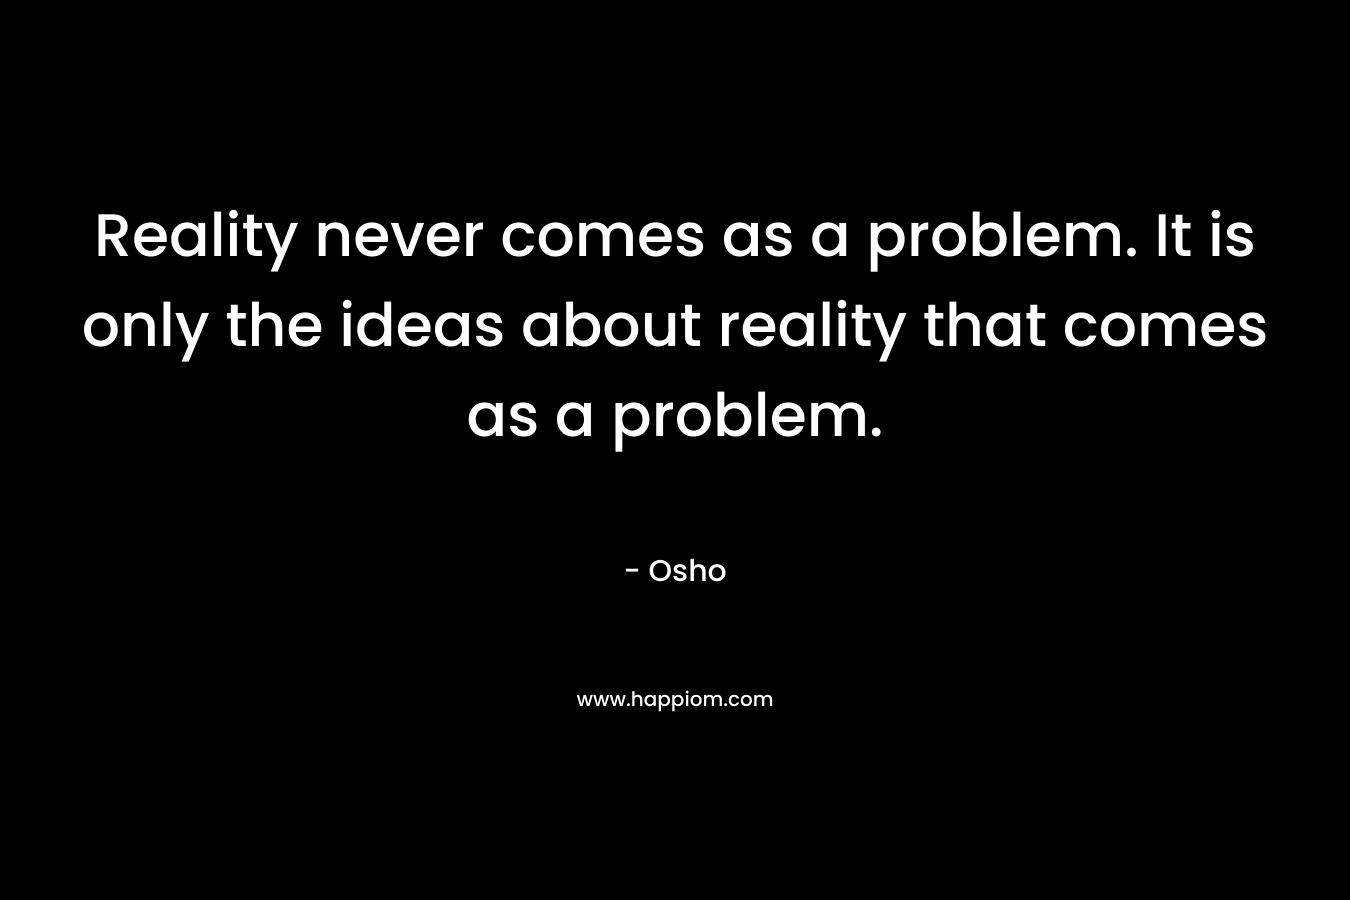 Reality never comes as a problem. It is only the ideas about reality that comes as a problem.